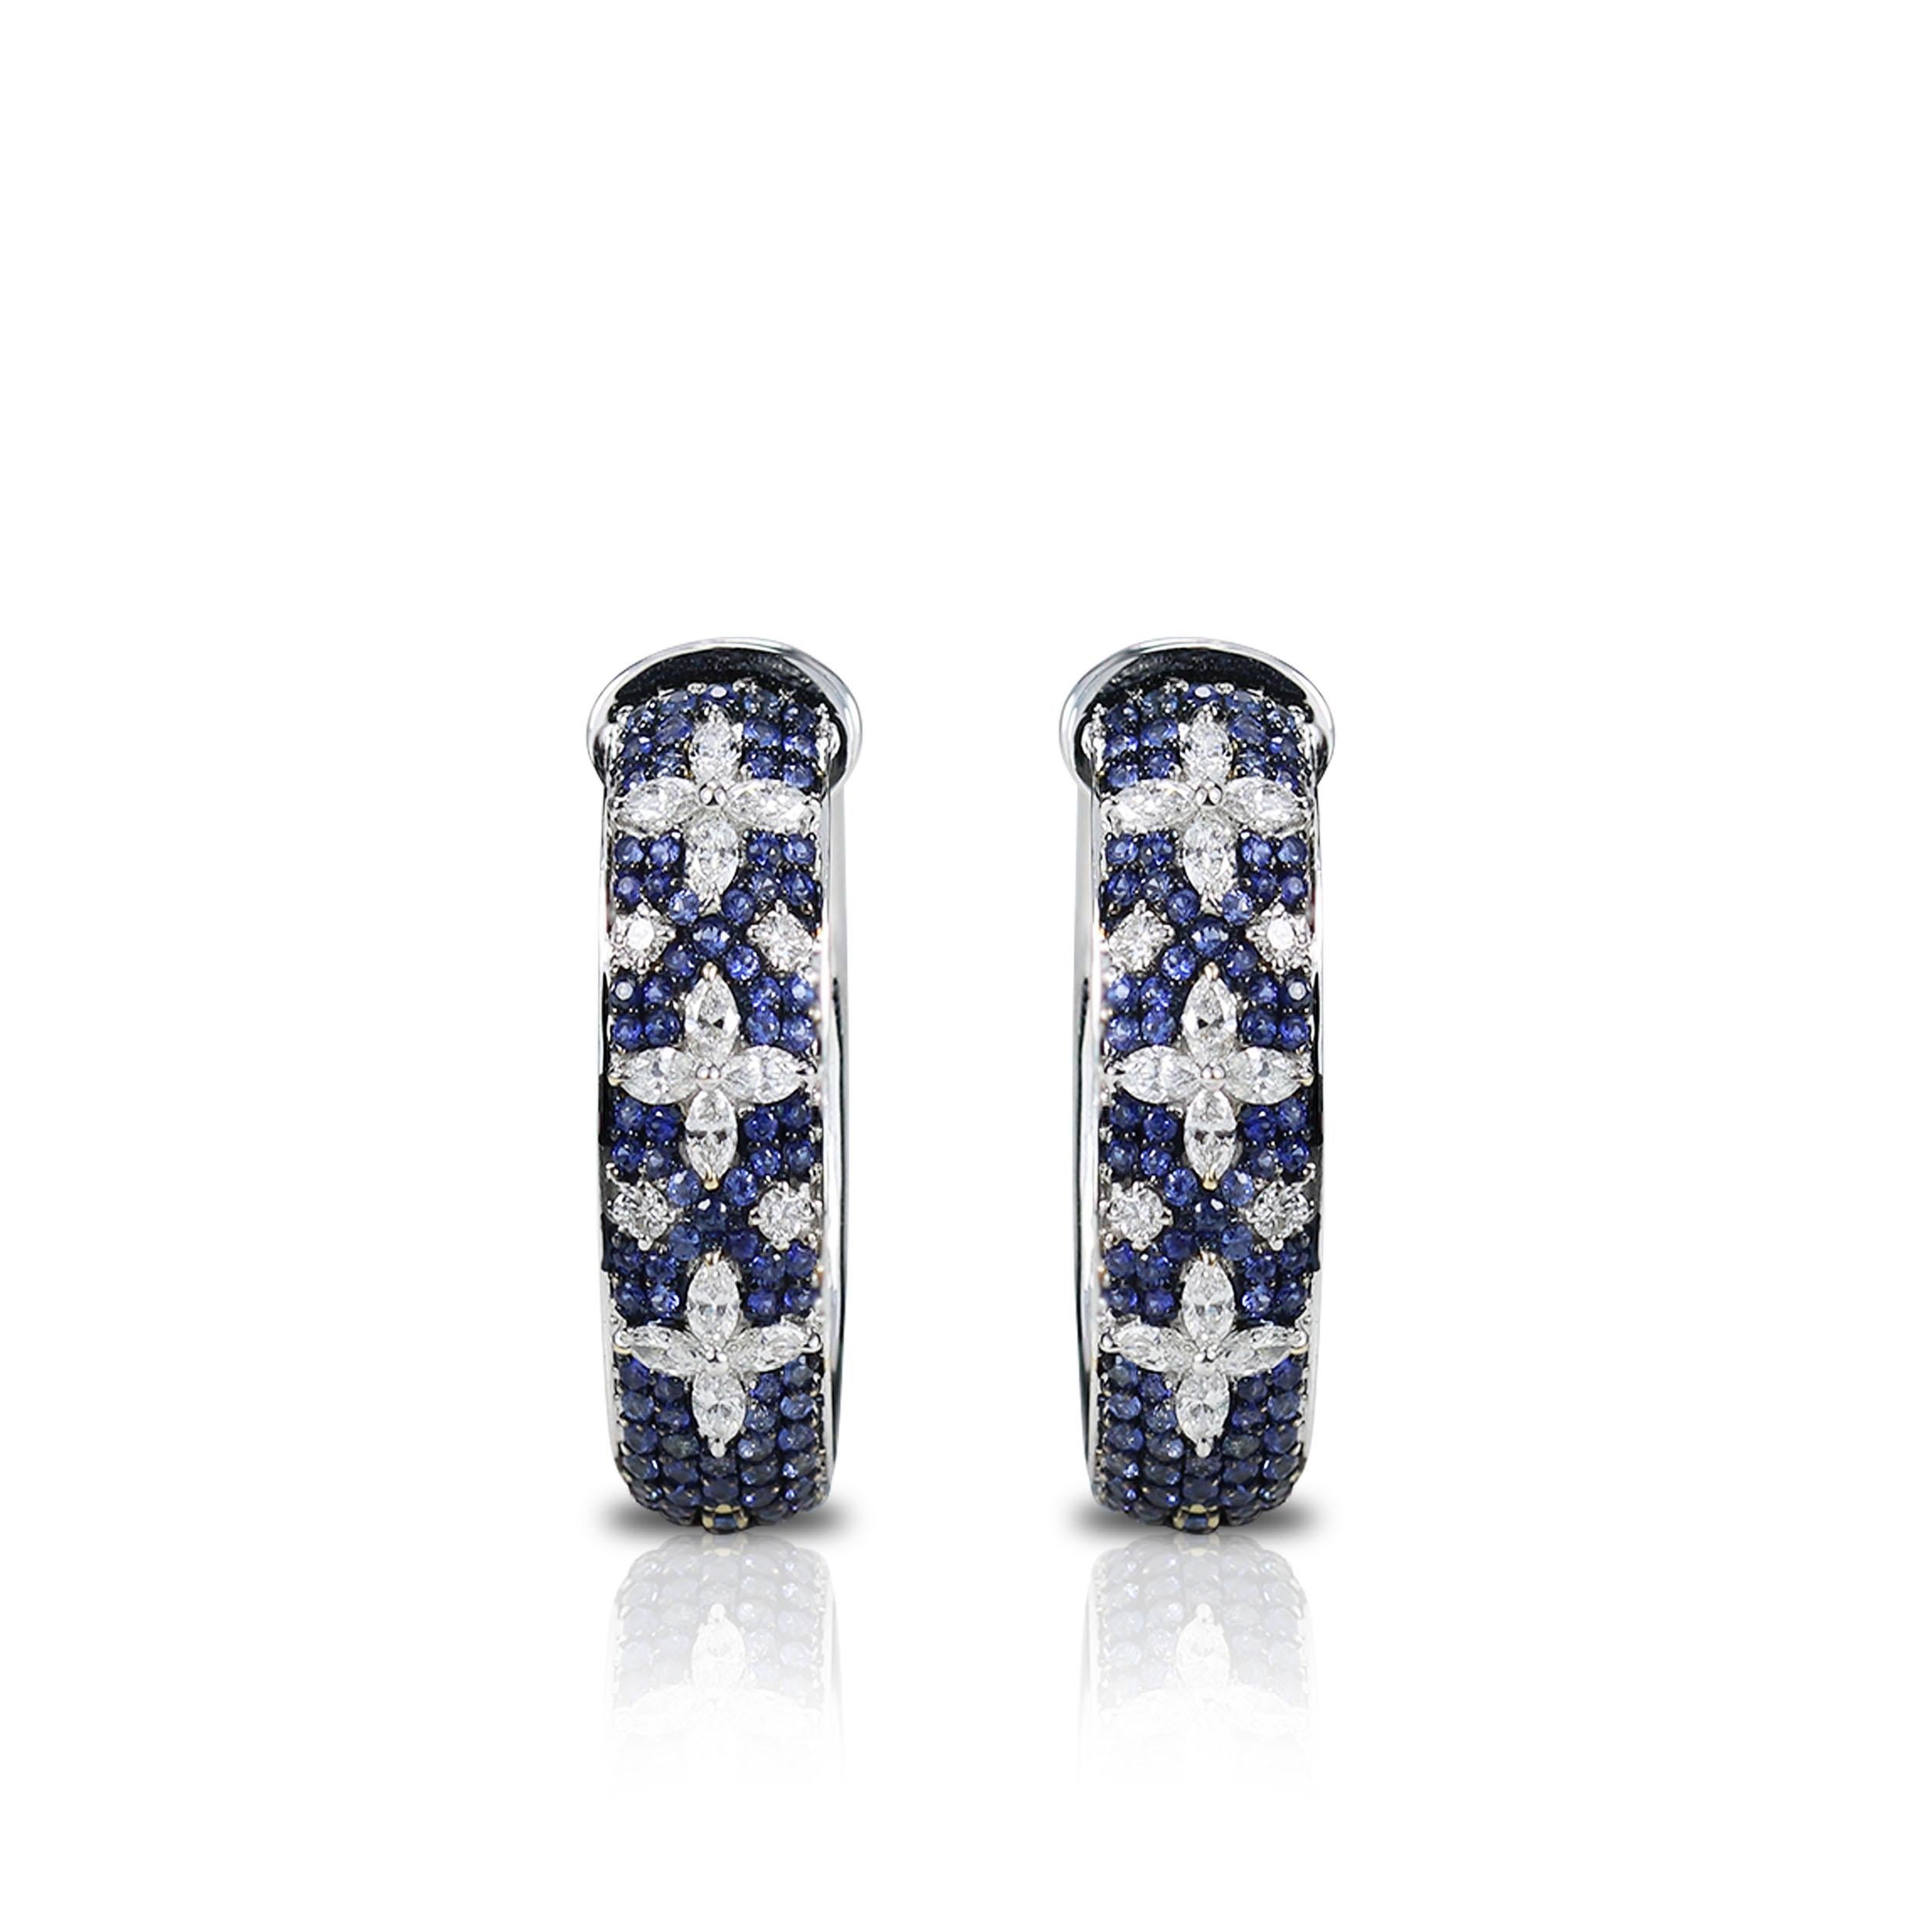 Blue sapphires and Diamonds Hoop Earrings

This 18K white gold hoop earrings created with a bed of blue sapphires, accentuated with twinkling marquise and round diamonds in a prong and pave setting is the kind of everyday staple that is equal parts